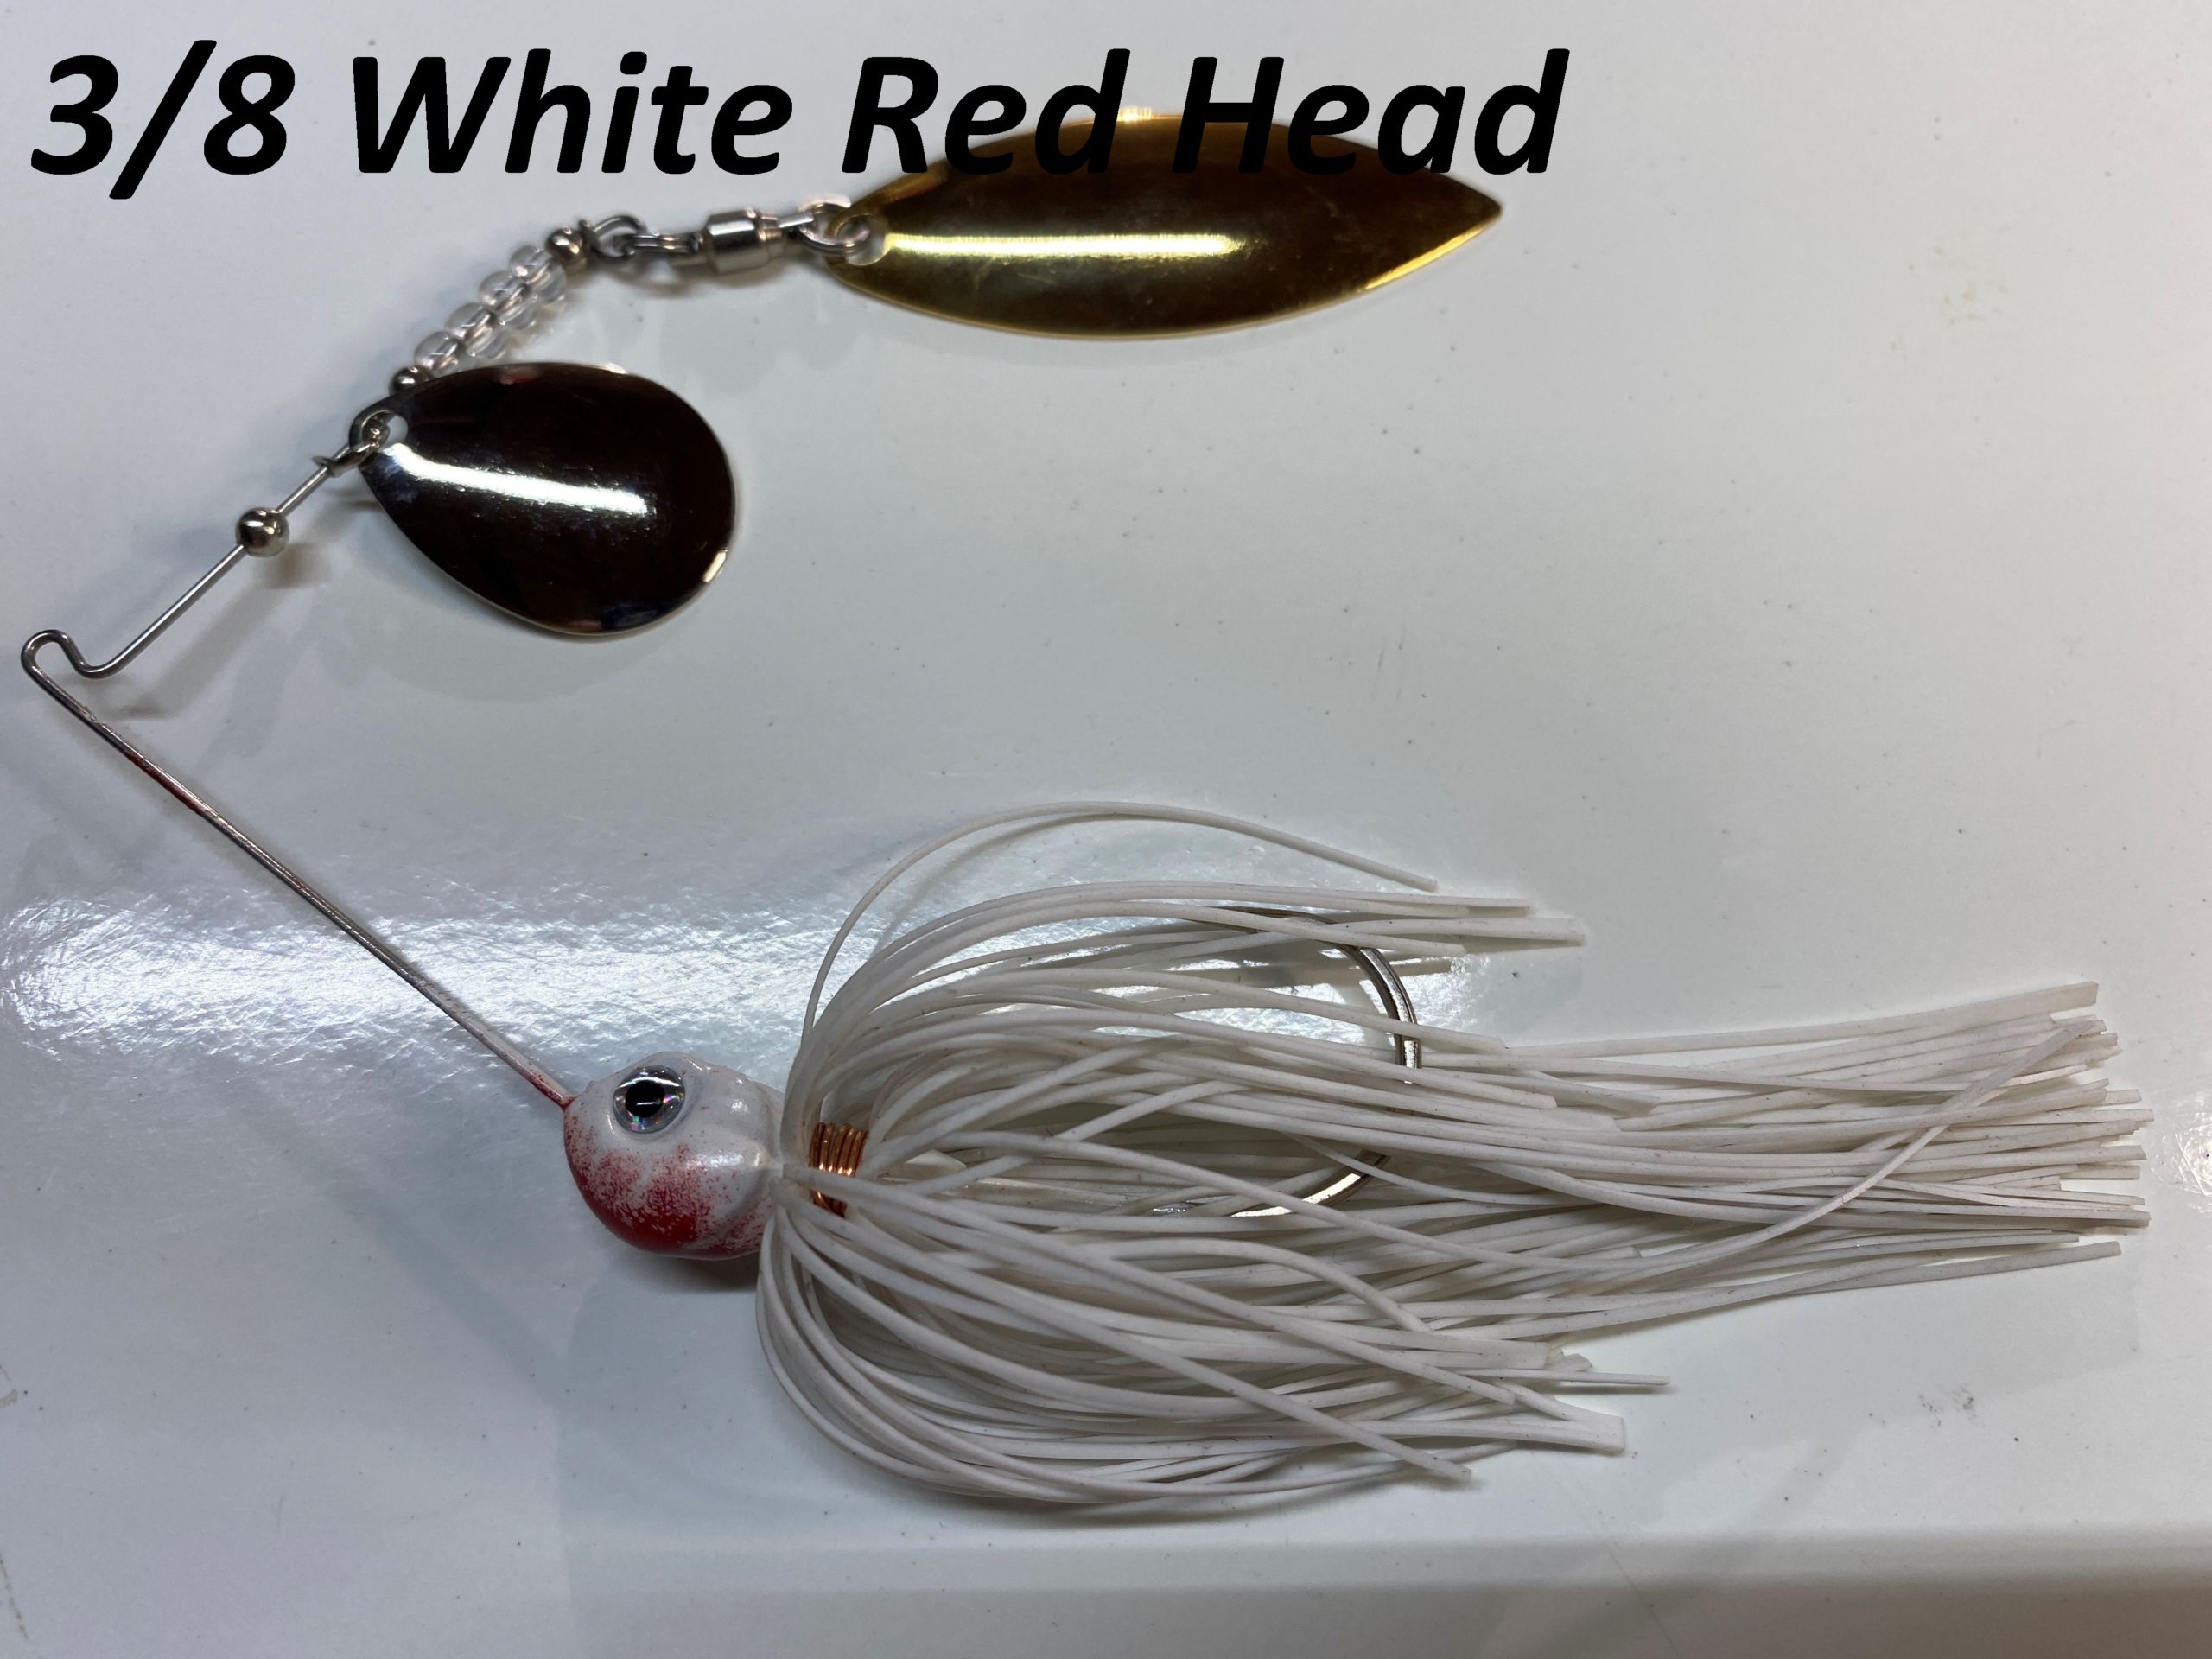 3/8 White Red Head – Adrenaline Tackle Company 217-502-6880